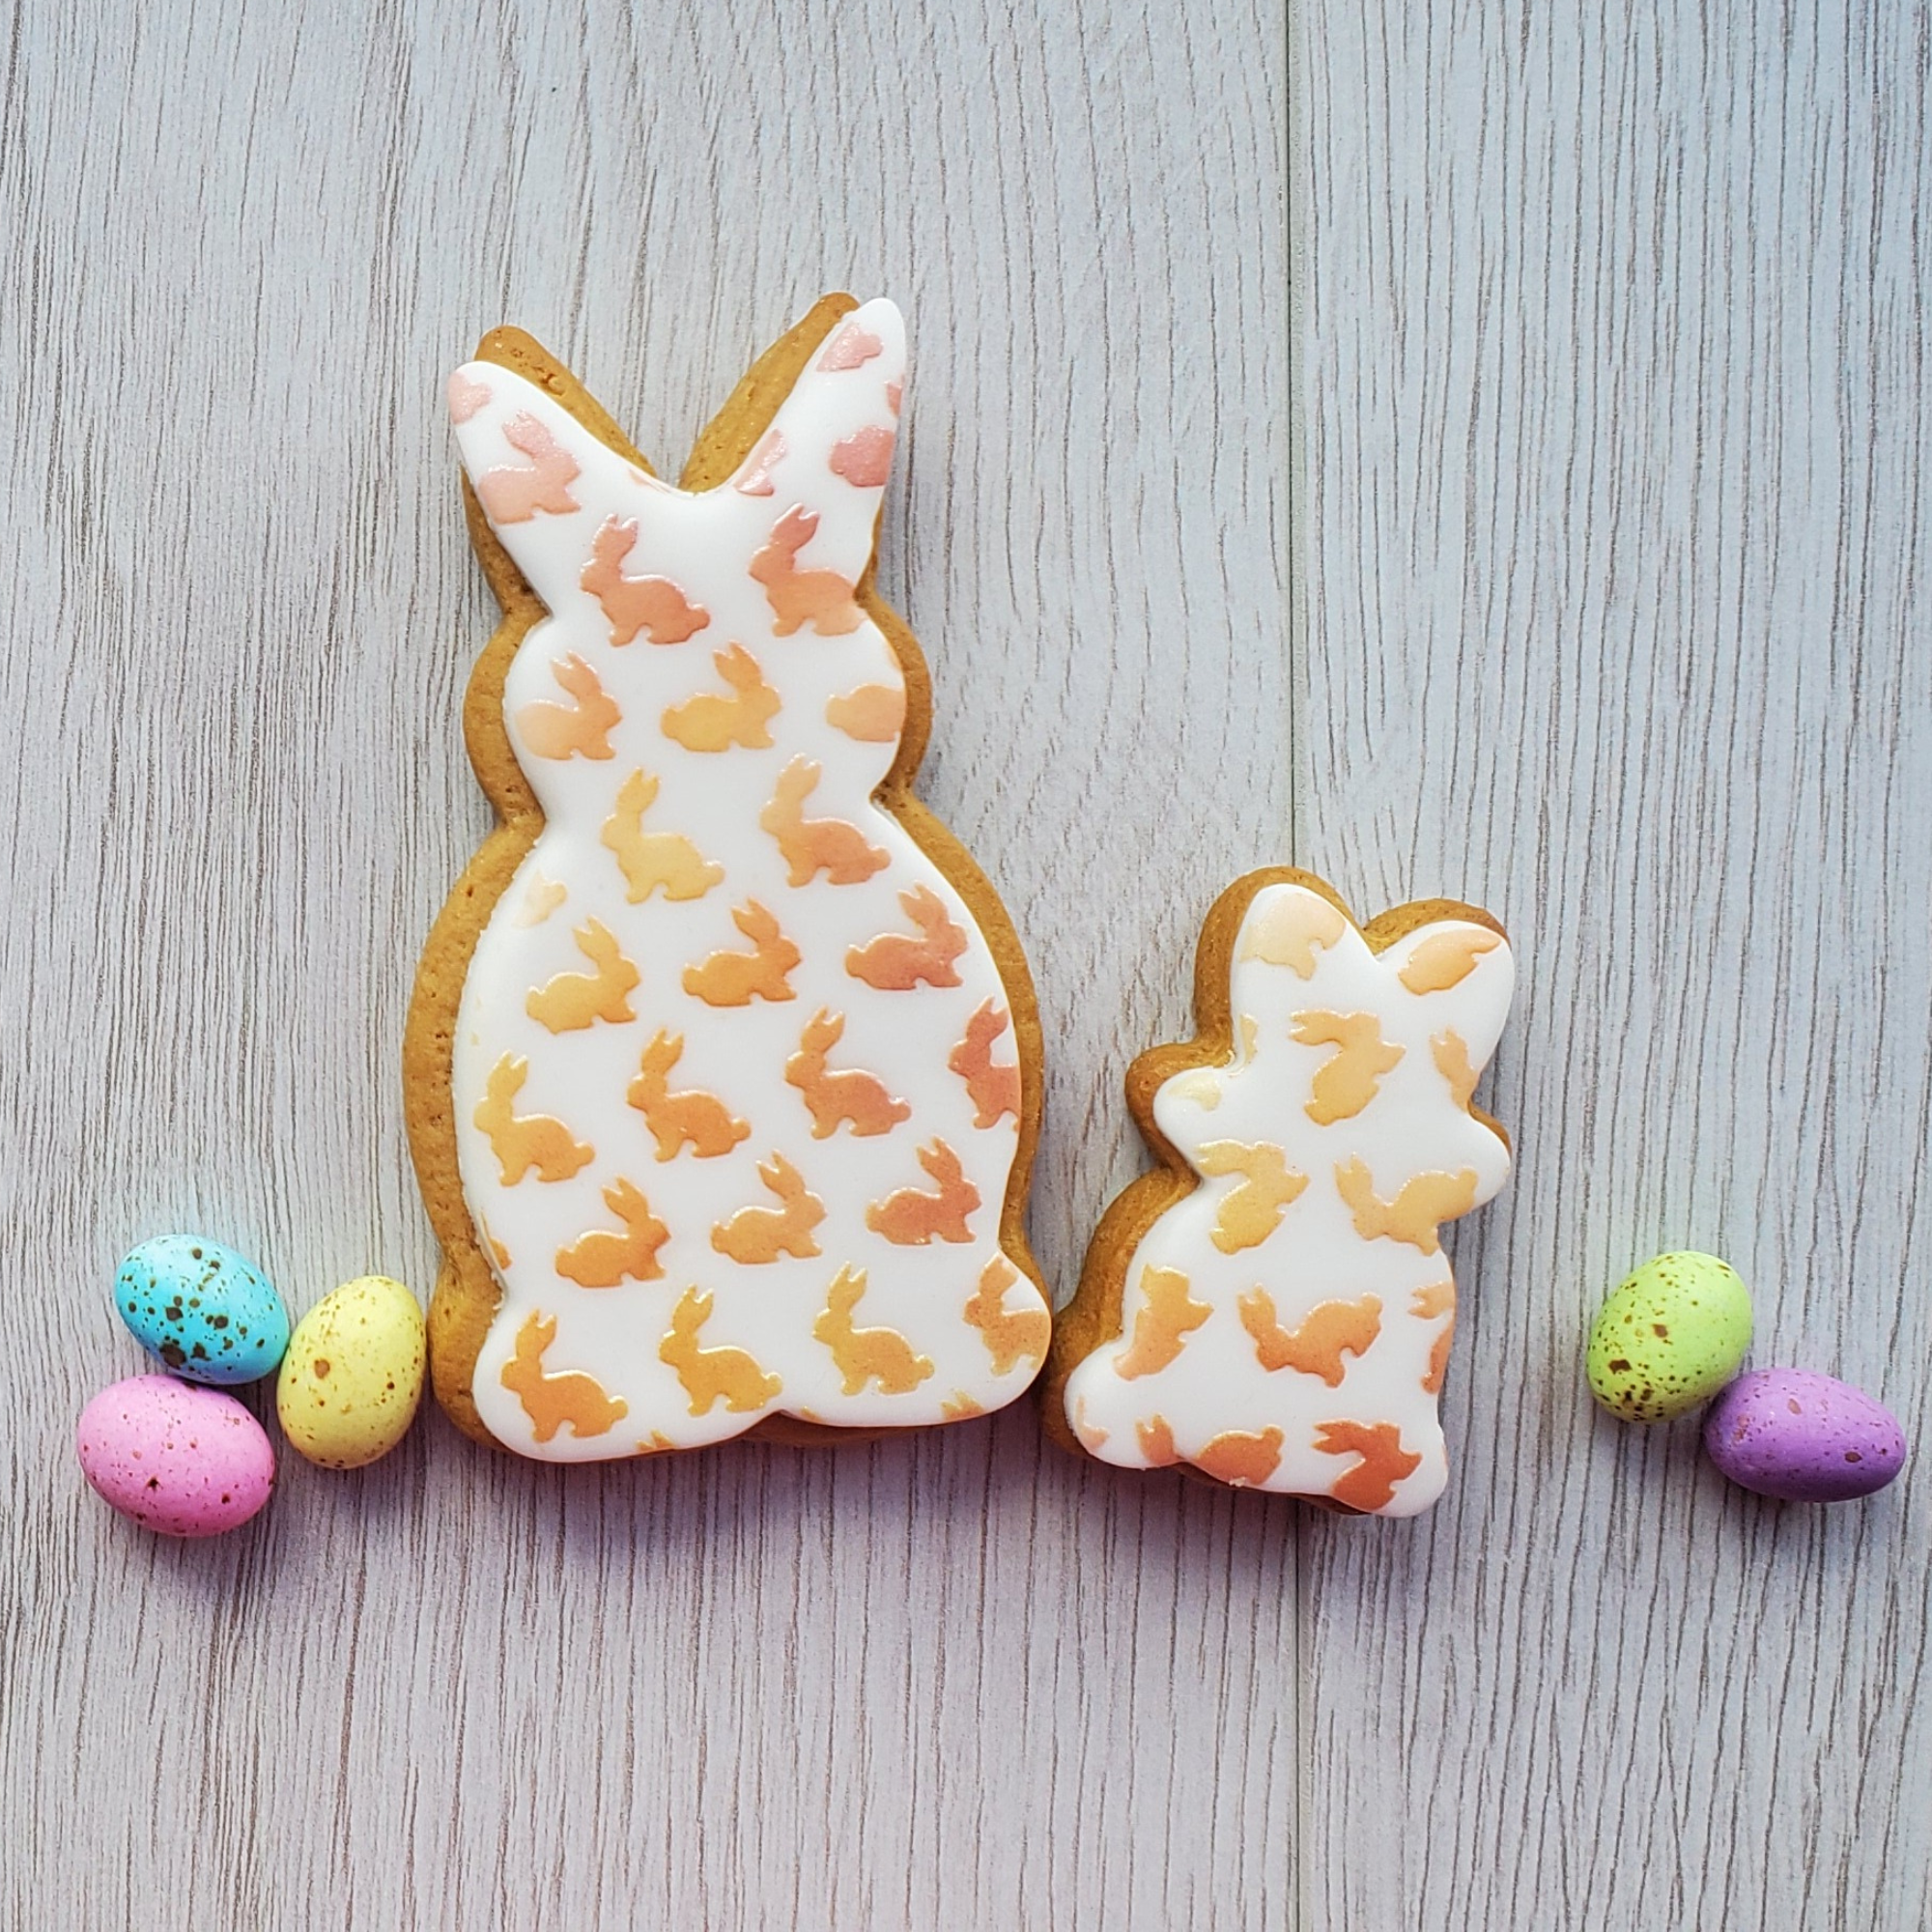 Little bunnies decorated onto two bunny shaped cookies